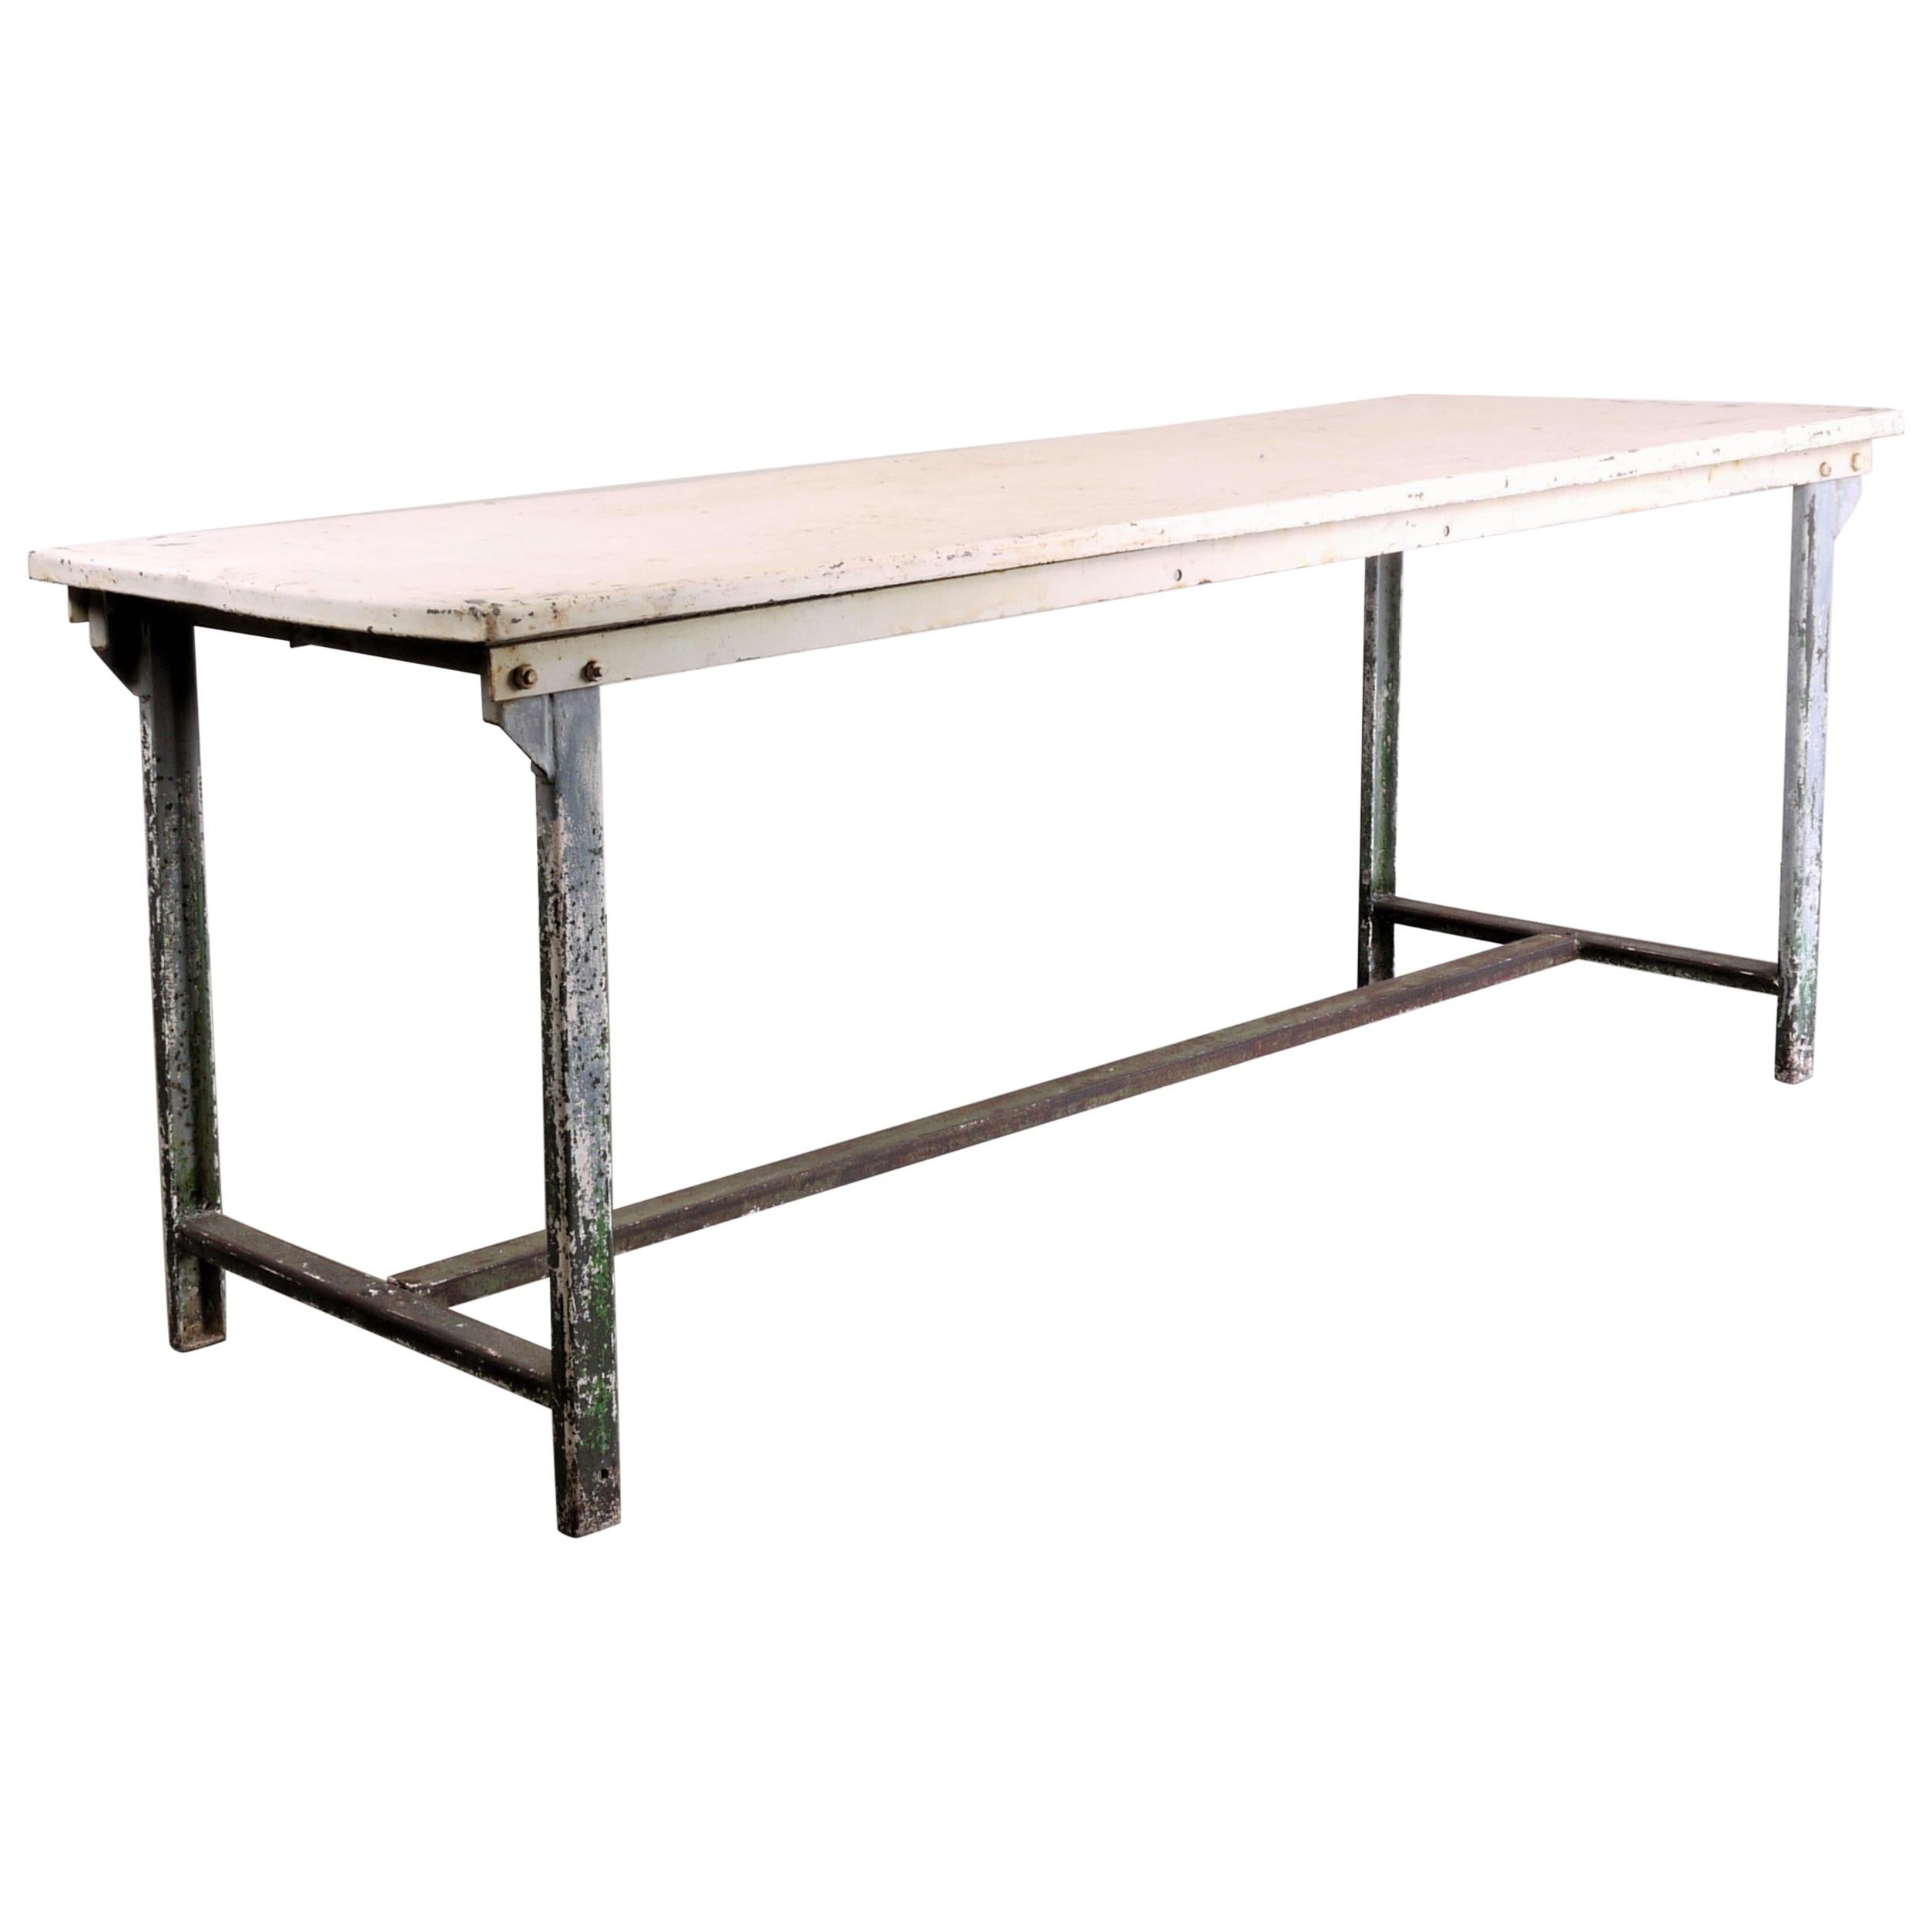 1960s Rectangular White Industrial Metal Dining or Statement Table